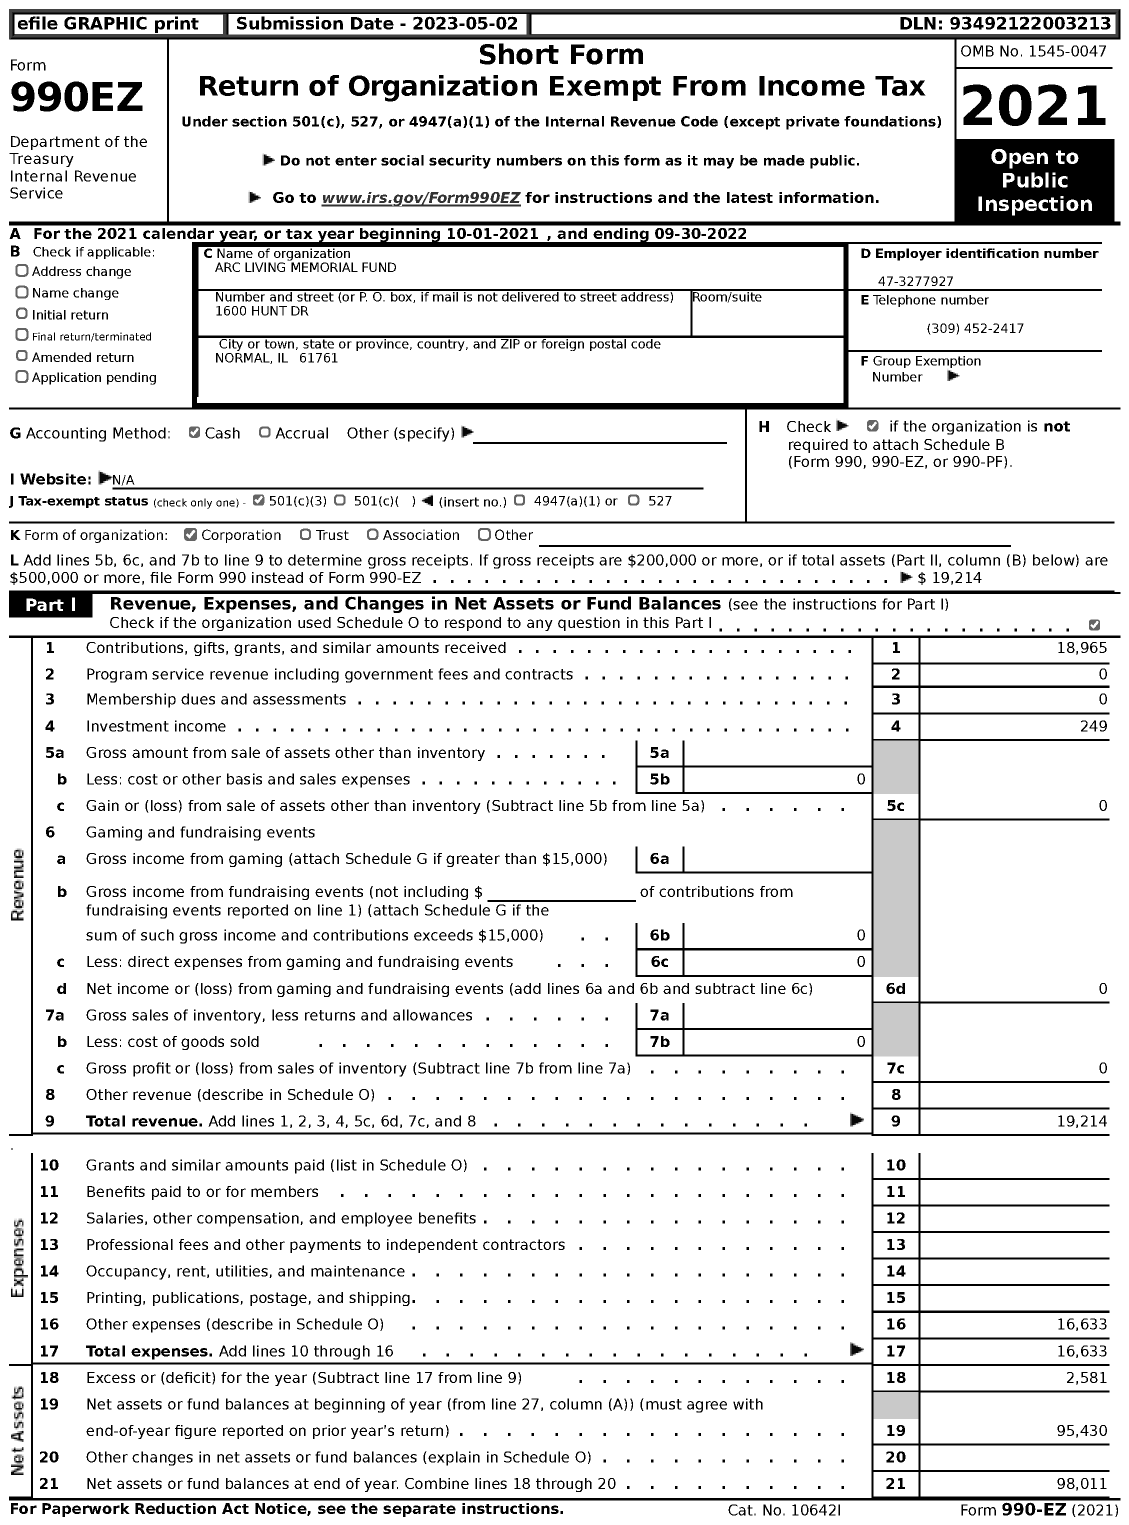 Image of first page of 2021 Form 990EZ for Arc Living Memorial Fund